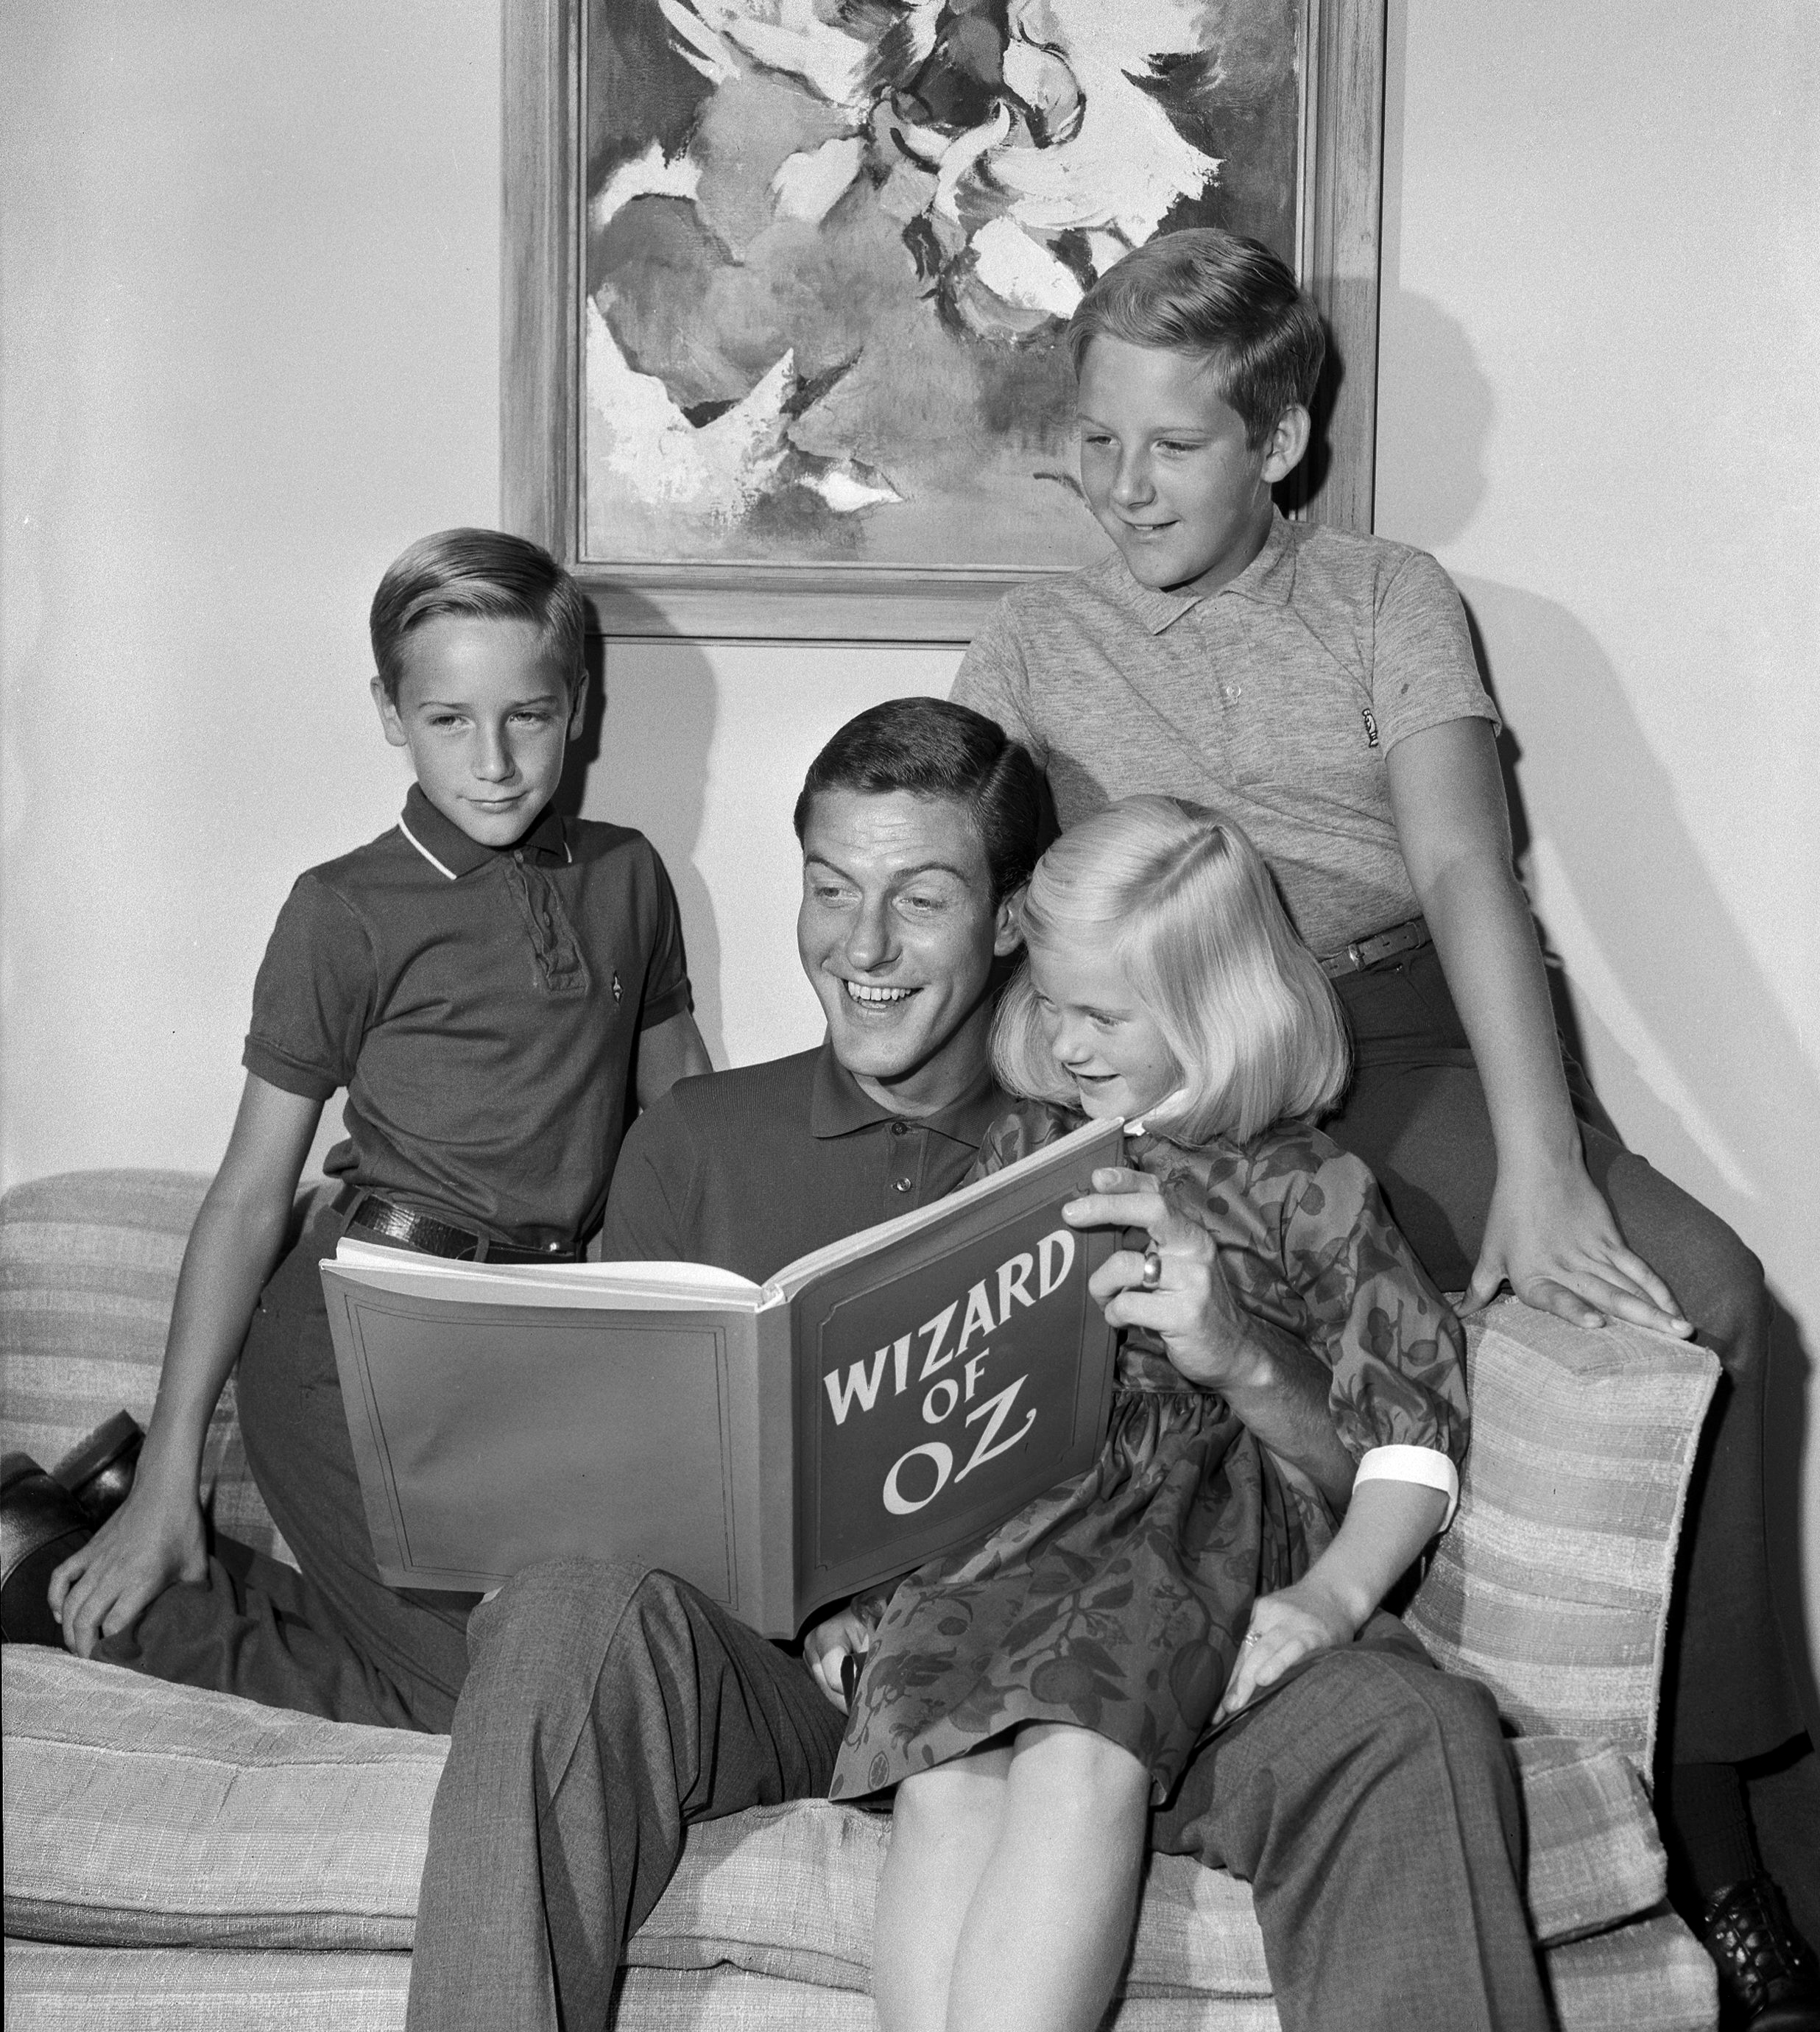 Dick Van Dyke with his children, (clockwise from top) Chris, Stacey and Barry doing 'lead-ins' for the special broadcast of THE WIZARD OF OZ. Image dated October 14, 1961. | Source: Getty Images